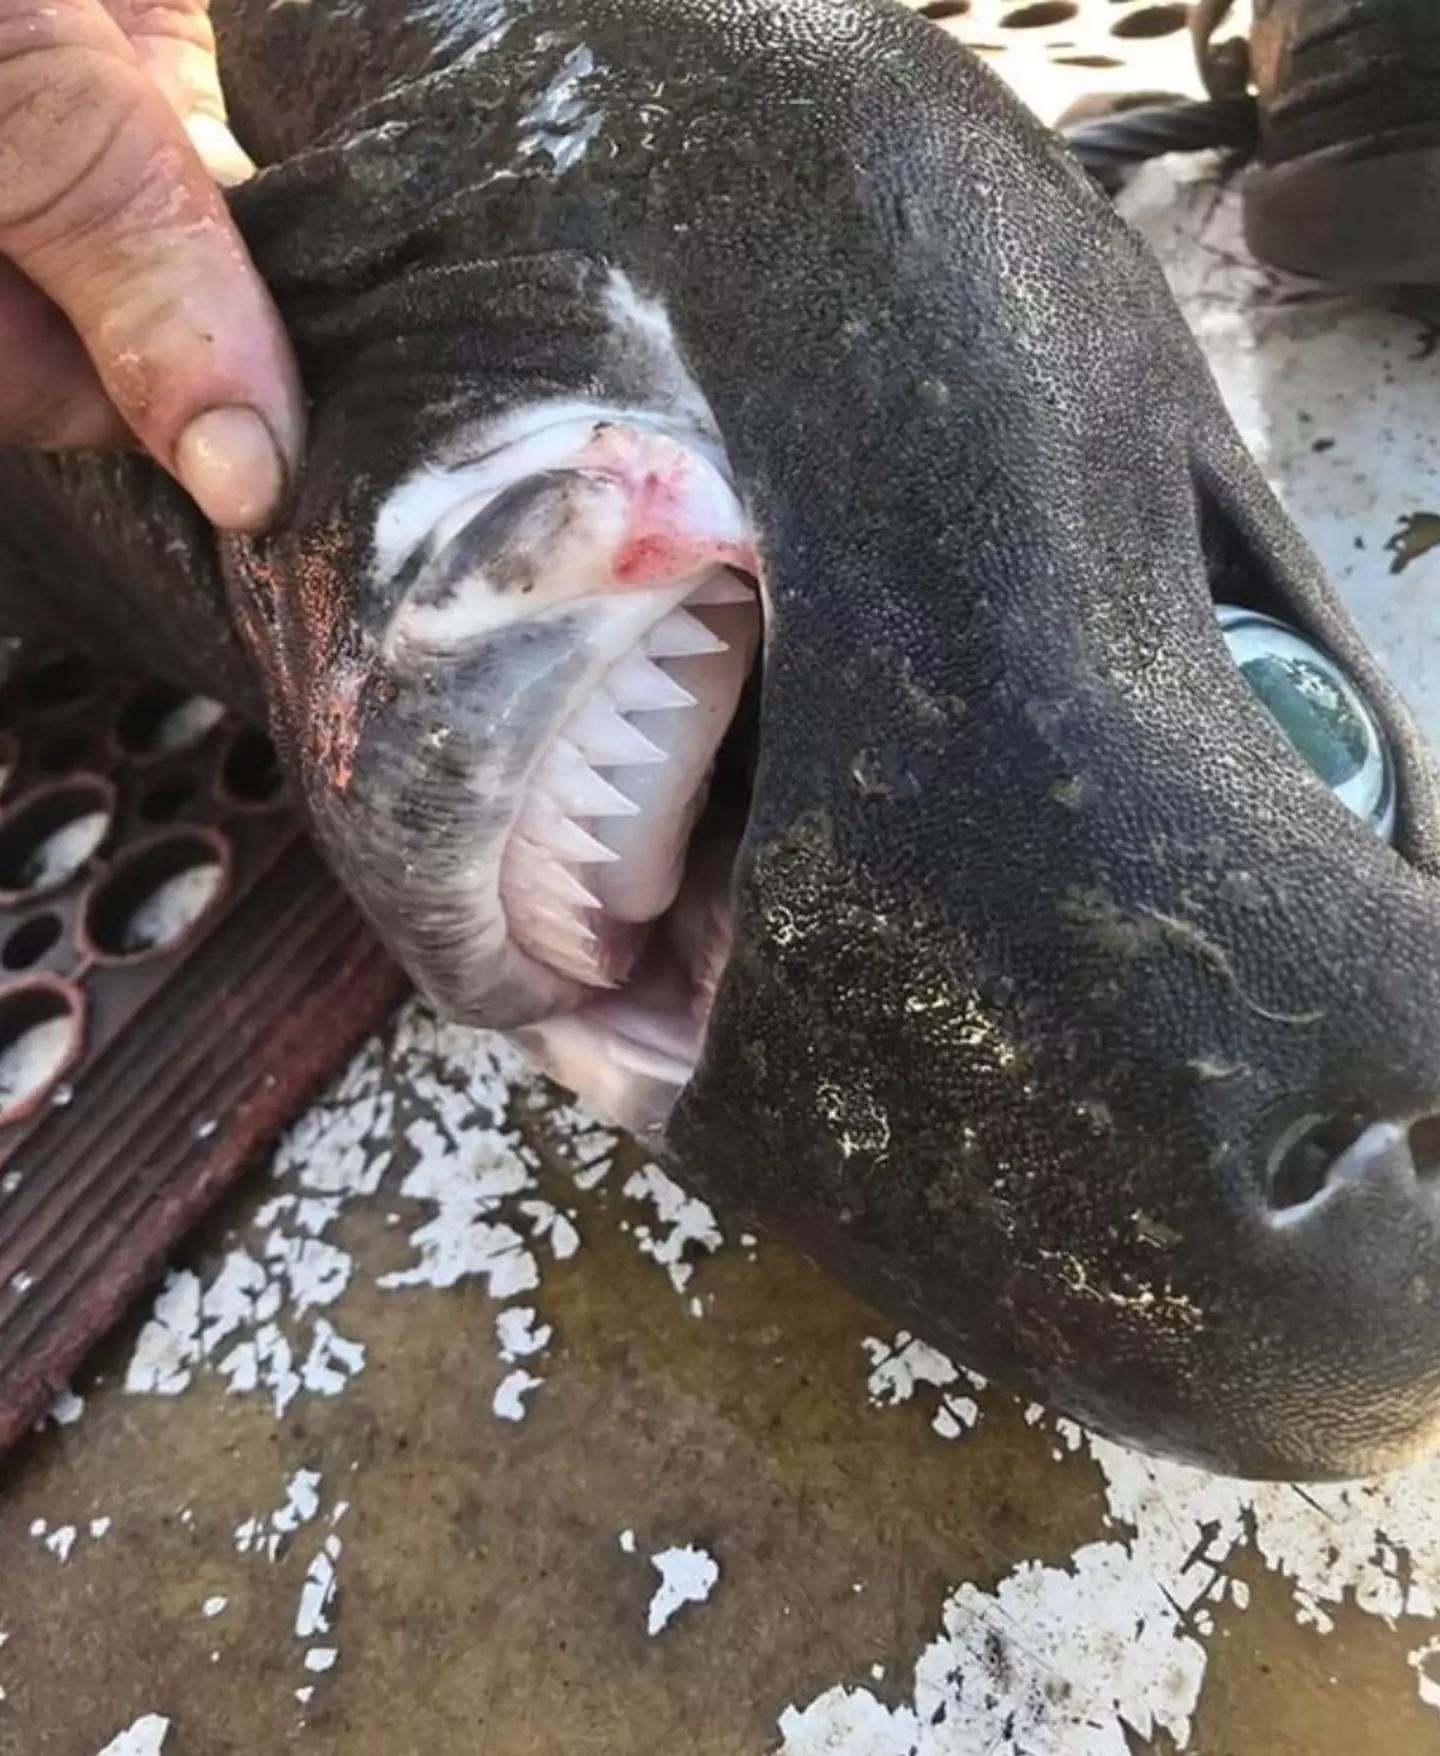 Days later, Bermagui posted a snap of another deep sea critter, this time caught by a different fisherman.